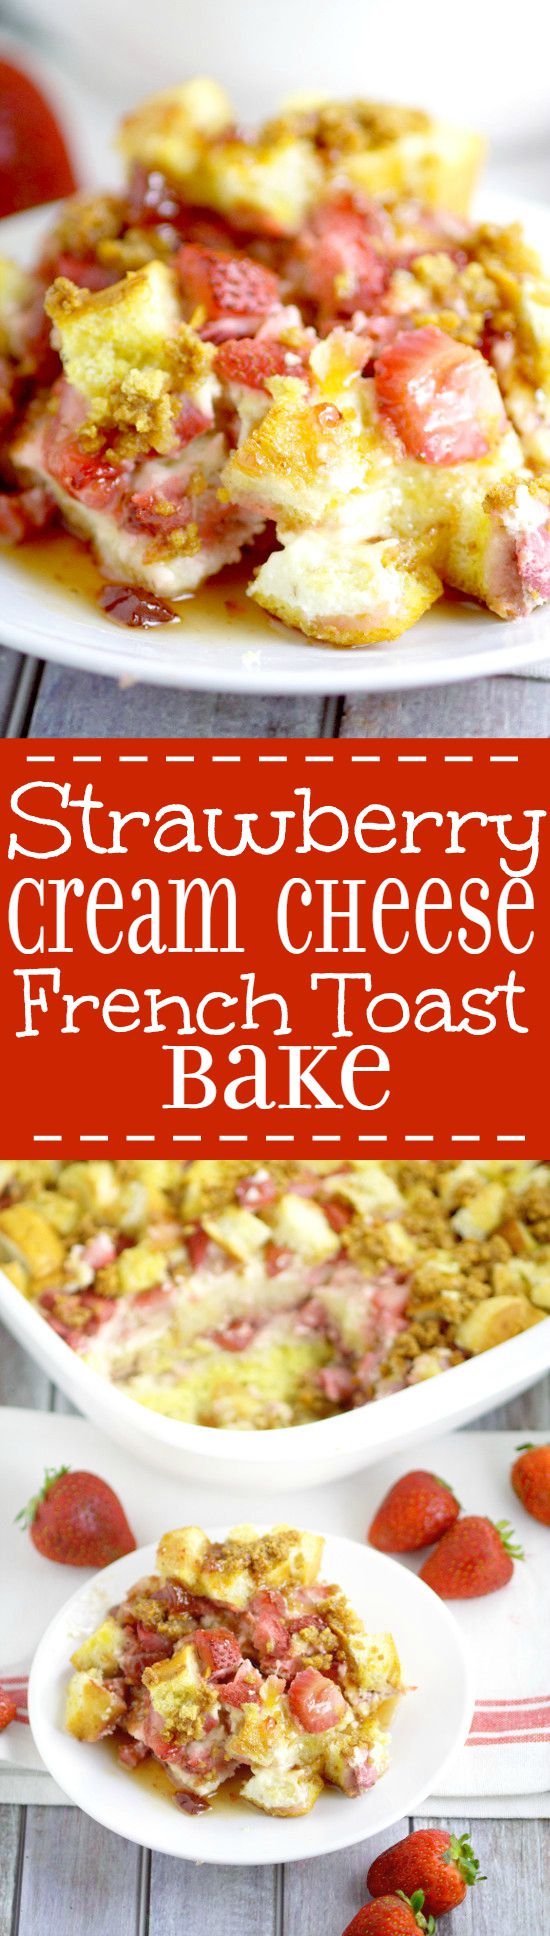 Have cheesecake for breakfast with Strawberry Cream Cheese French Toast Bake! Filled with fresh strawberries, creamy cheesecake spread, and a graham cracker topping! A delicious overnight, make ahead breakfast casserole recipe that's great for the holidays, Christmas, and busy mornings!